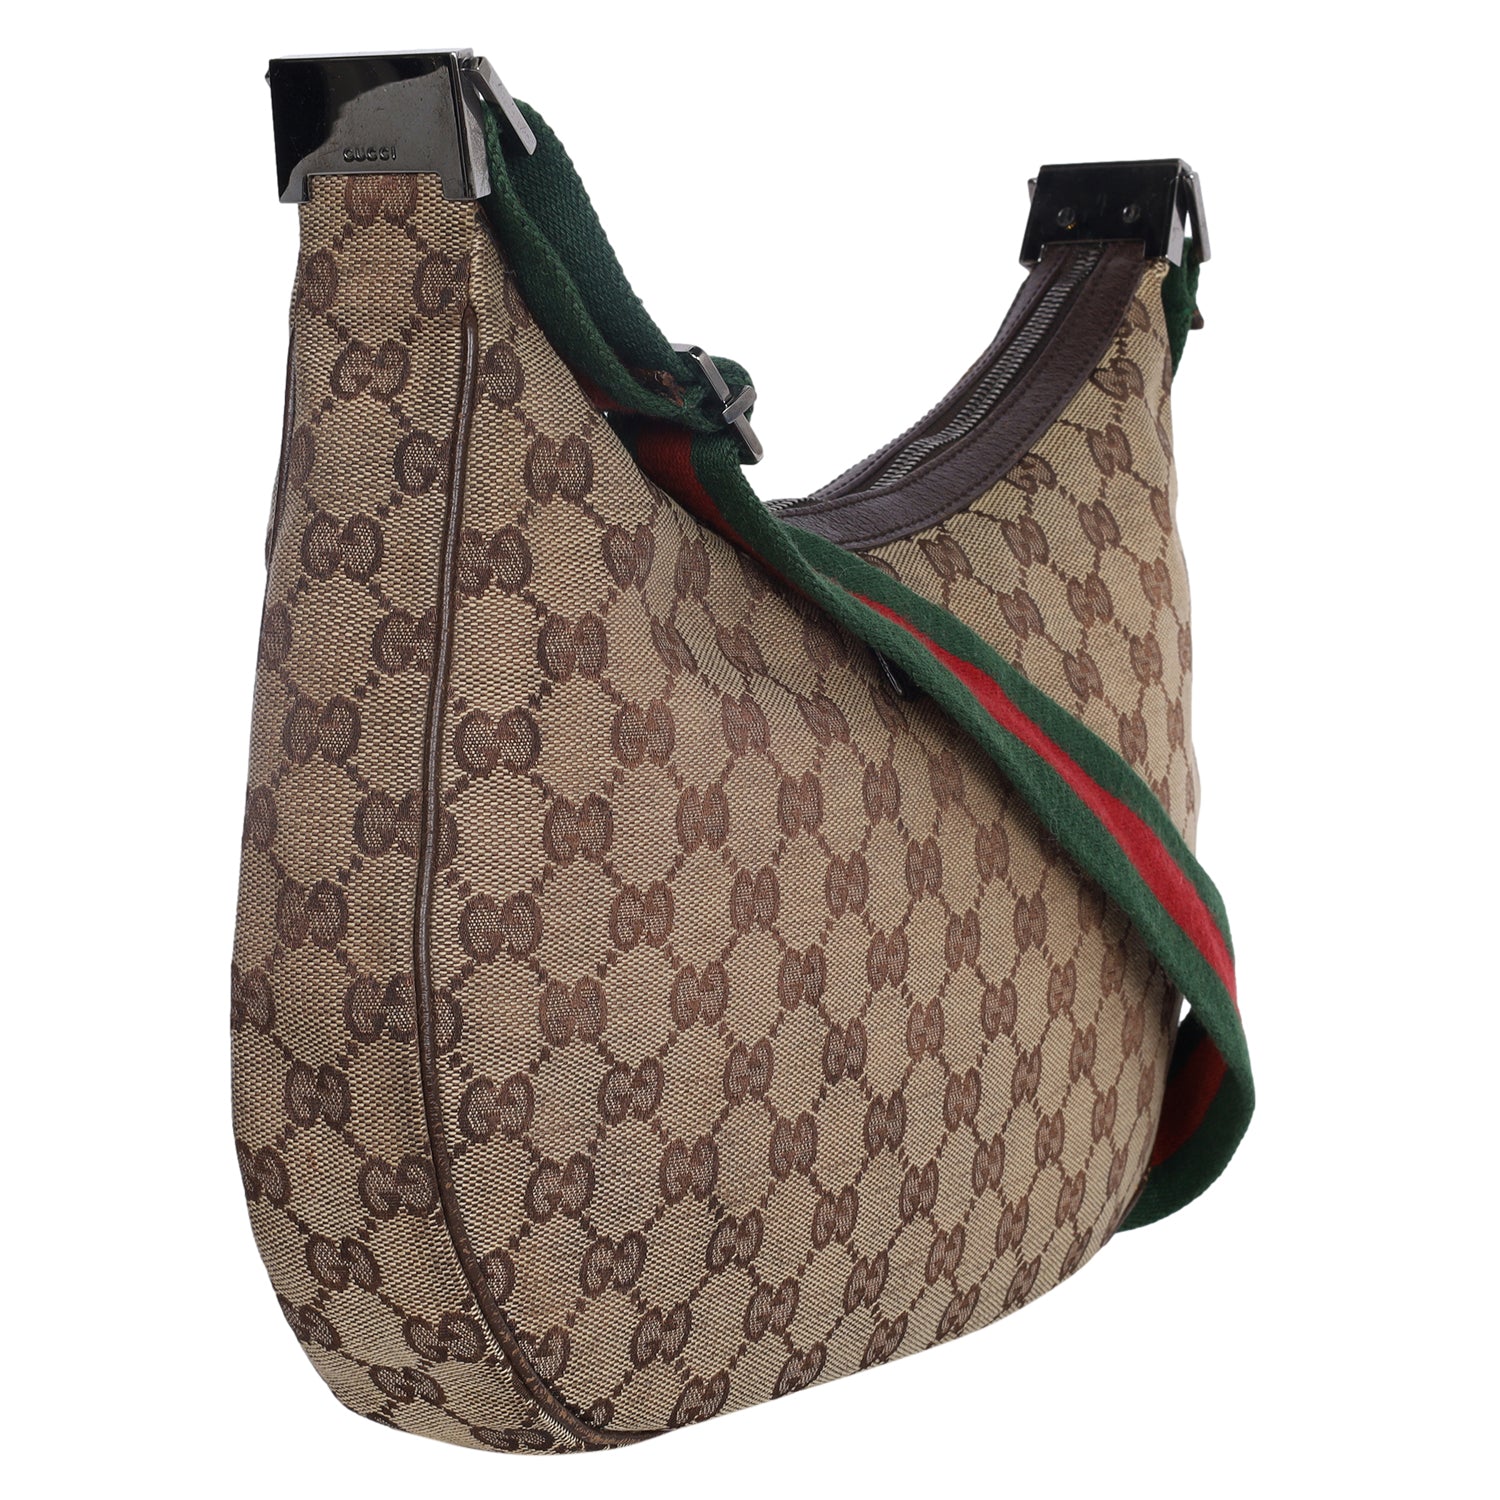 Second Hand Gucci Ophidia Bags, UhfmrShops